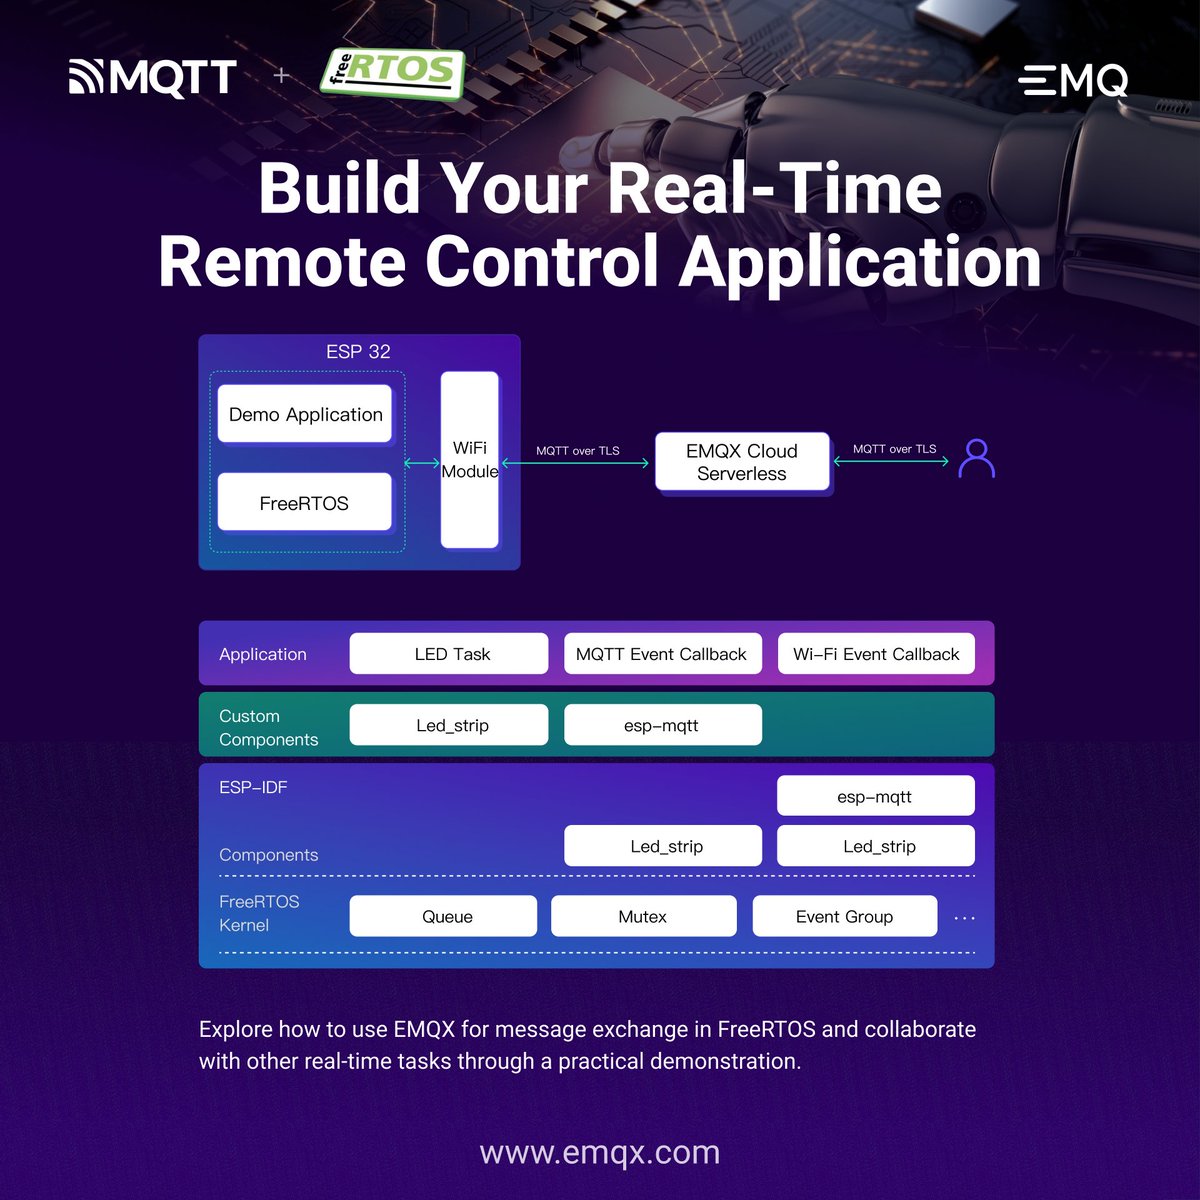 🛠️ Dive into our latest blog to learn why RTOS is vital for aerospace, medical equipment, and industrial control. ✈️ Discover how to build seamless communication and enhance efficiency with EMQX & FreeRTOS. #FutureTech #Industry4.0 ⬇️ social.emqx.com/u/OyGbTh